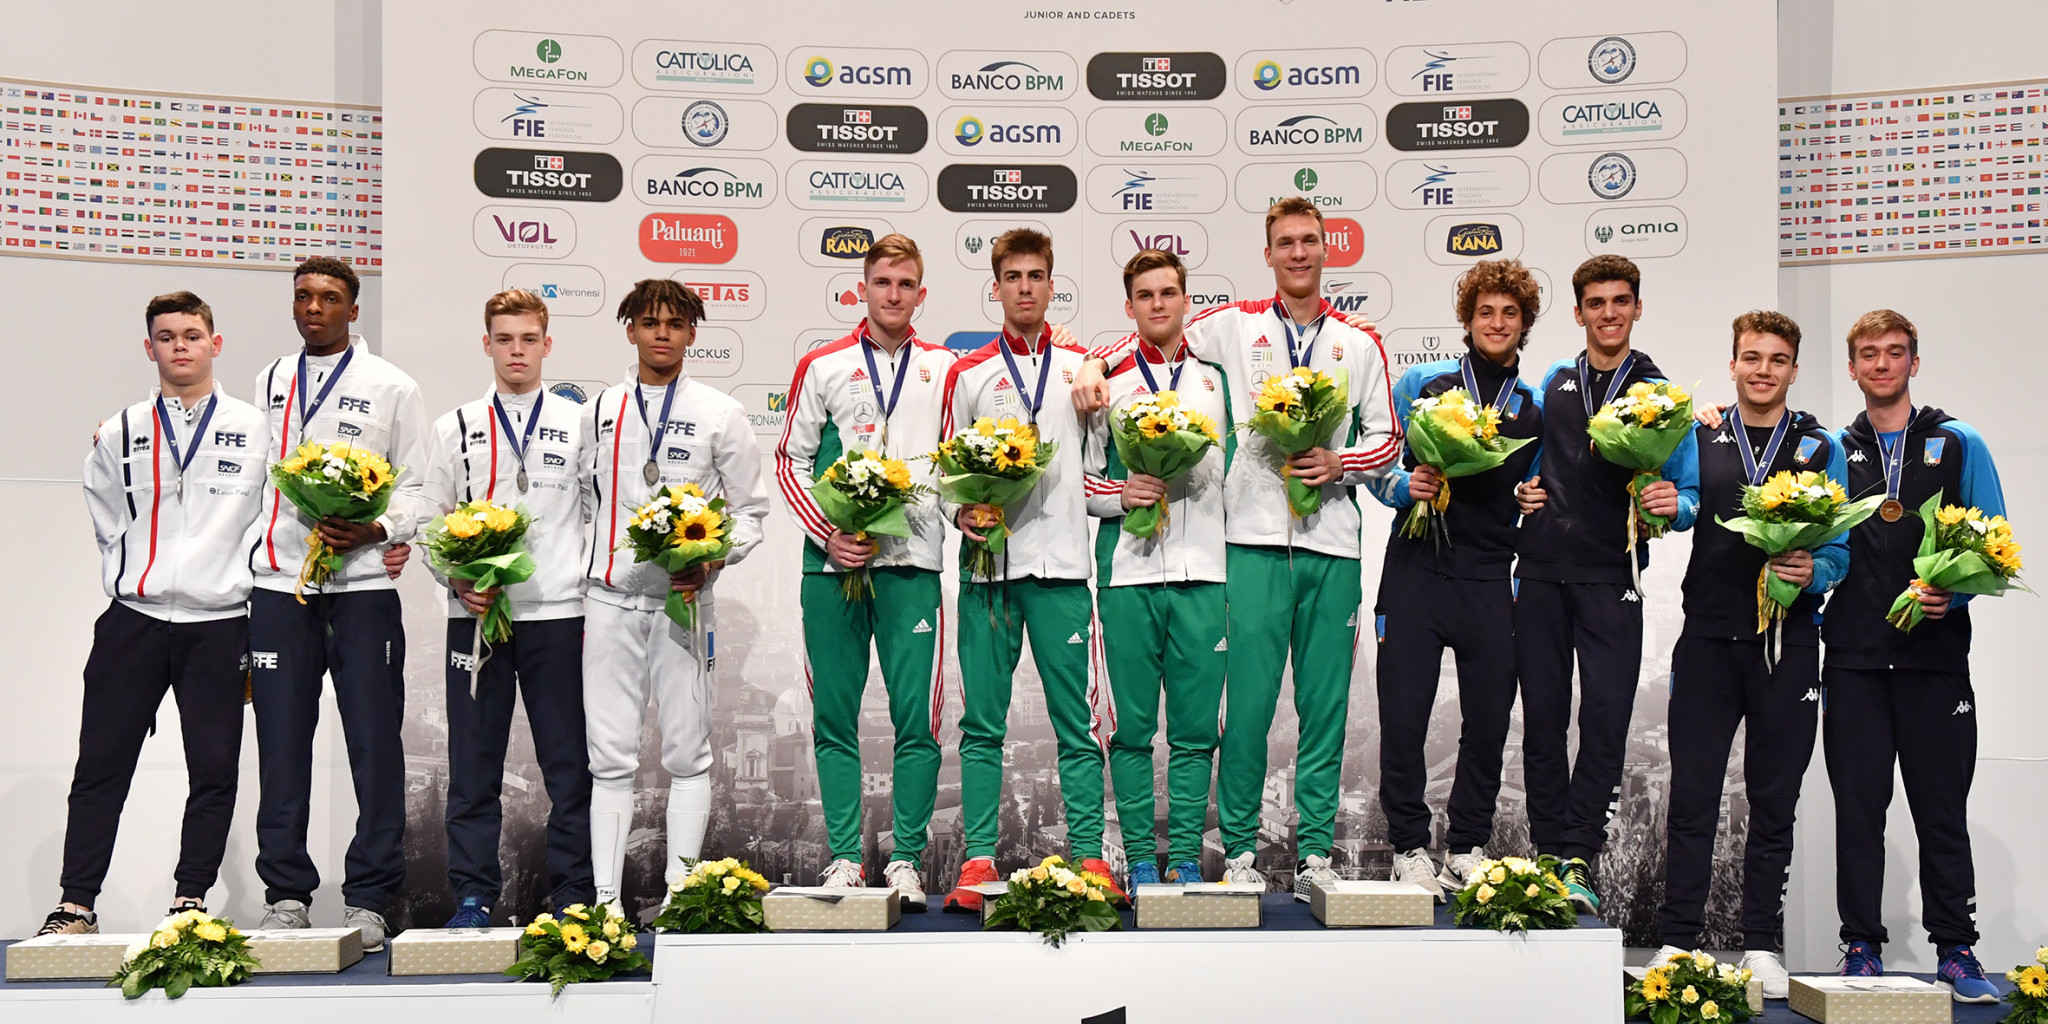 The men's title went to the Hungarians ©FIE